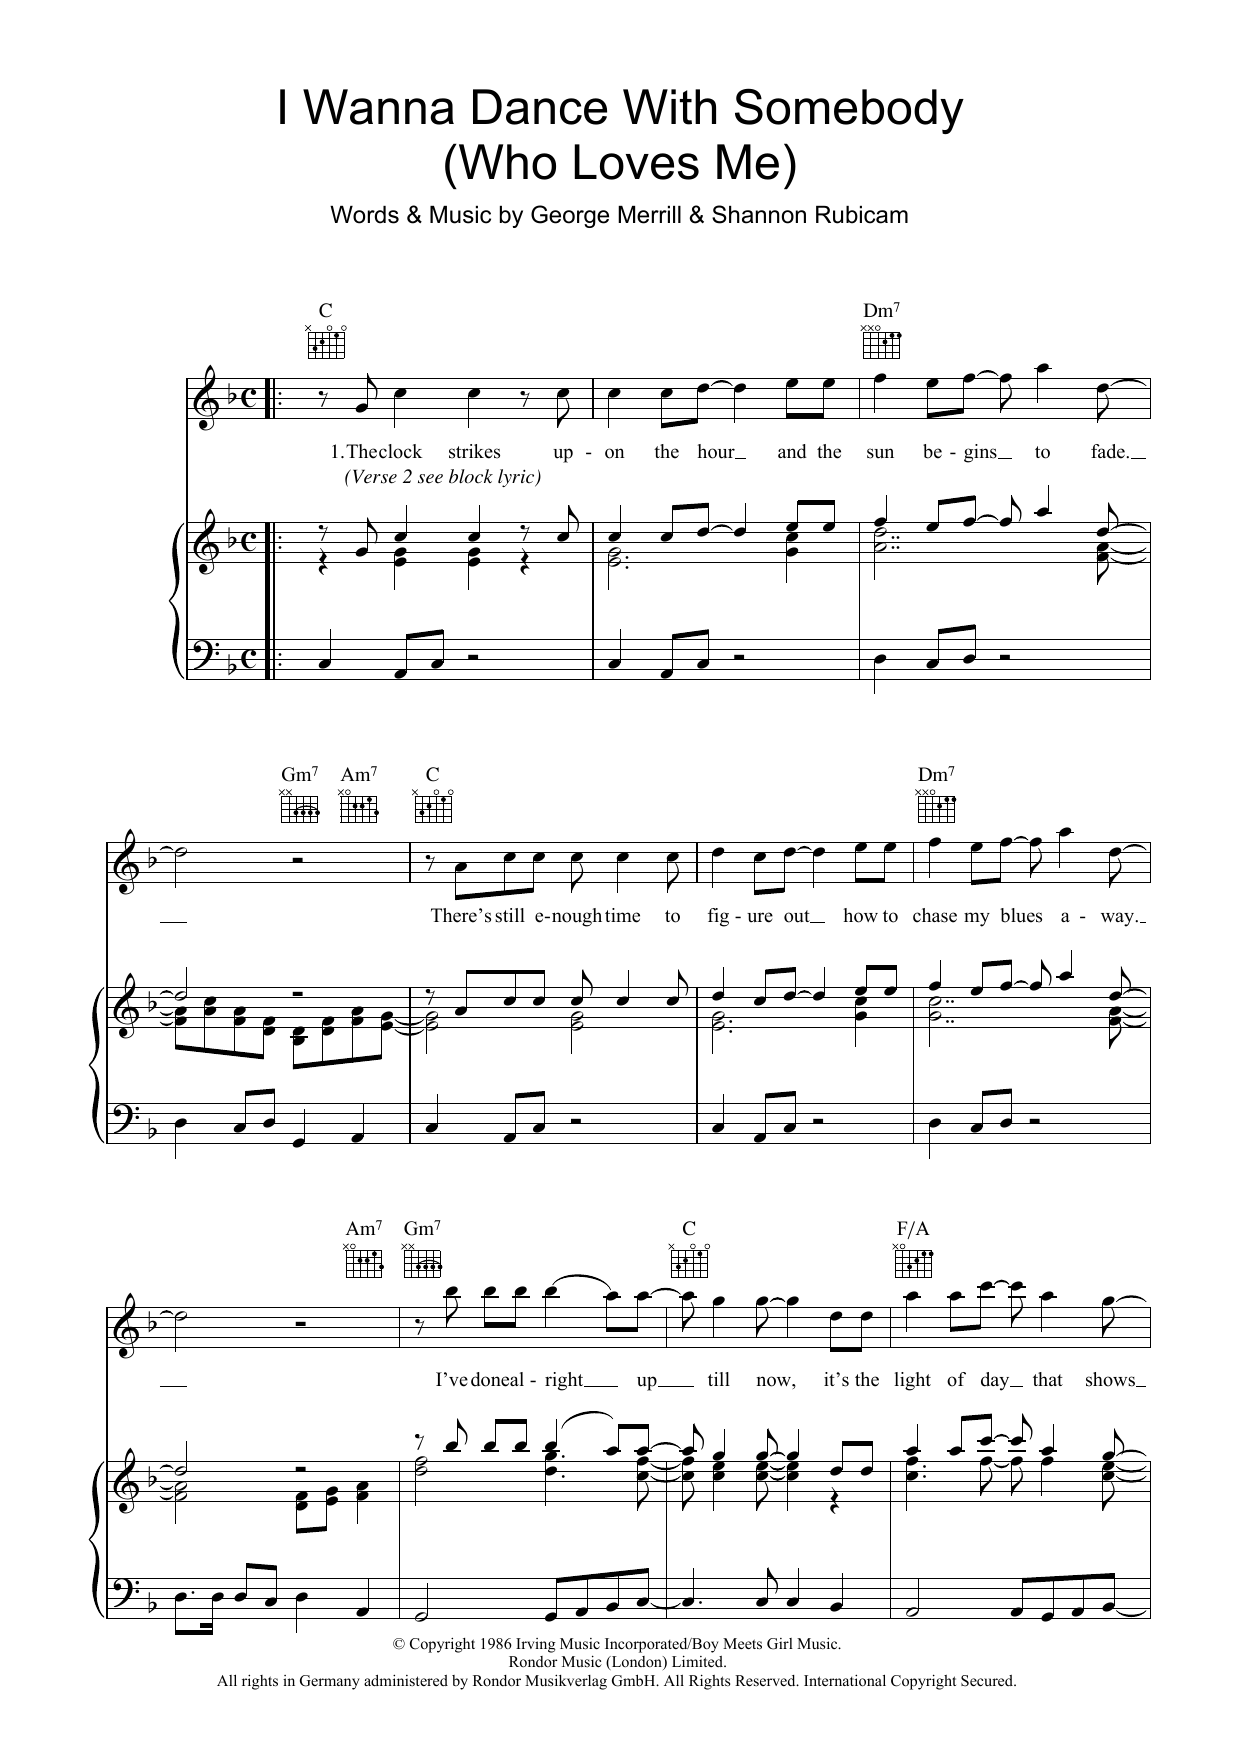 I Wanna Dance With Somebody Sheet Music By Whitney Houston For Piano Keyboard And Voice Noteflight Marketplace